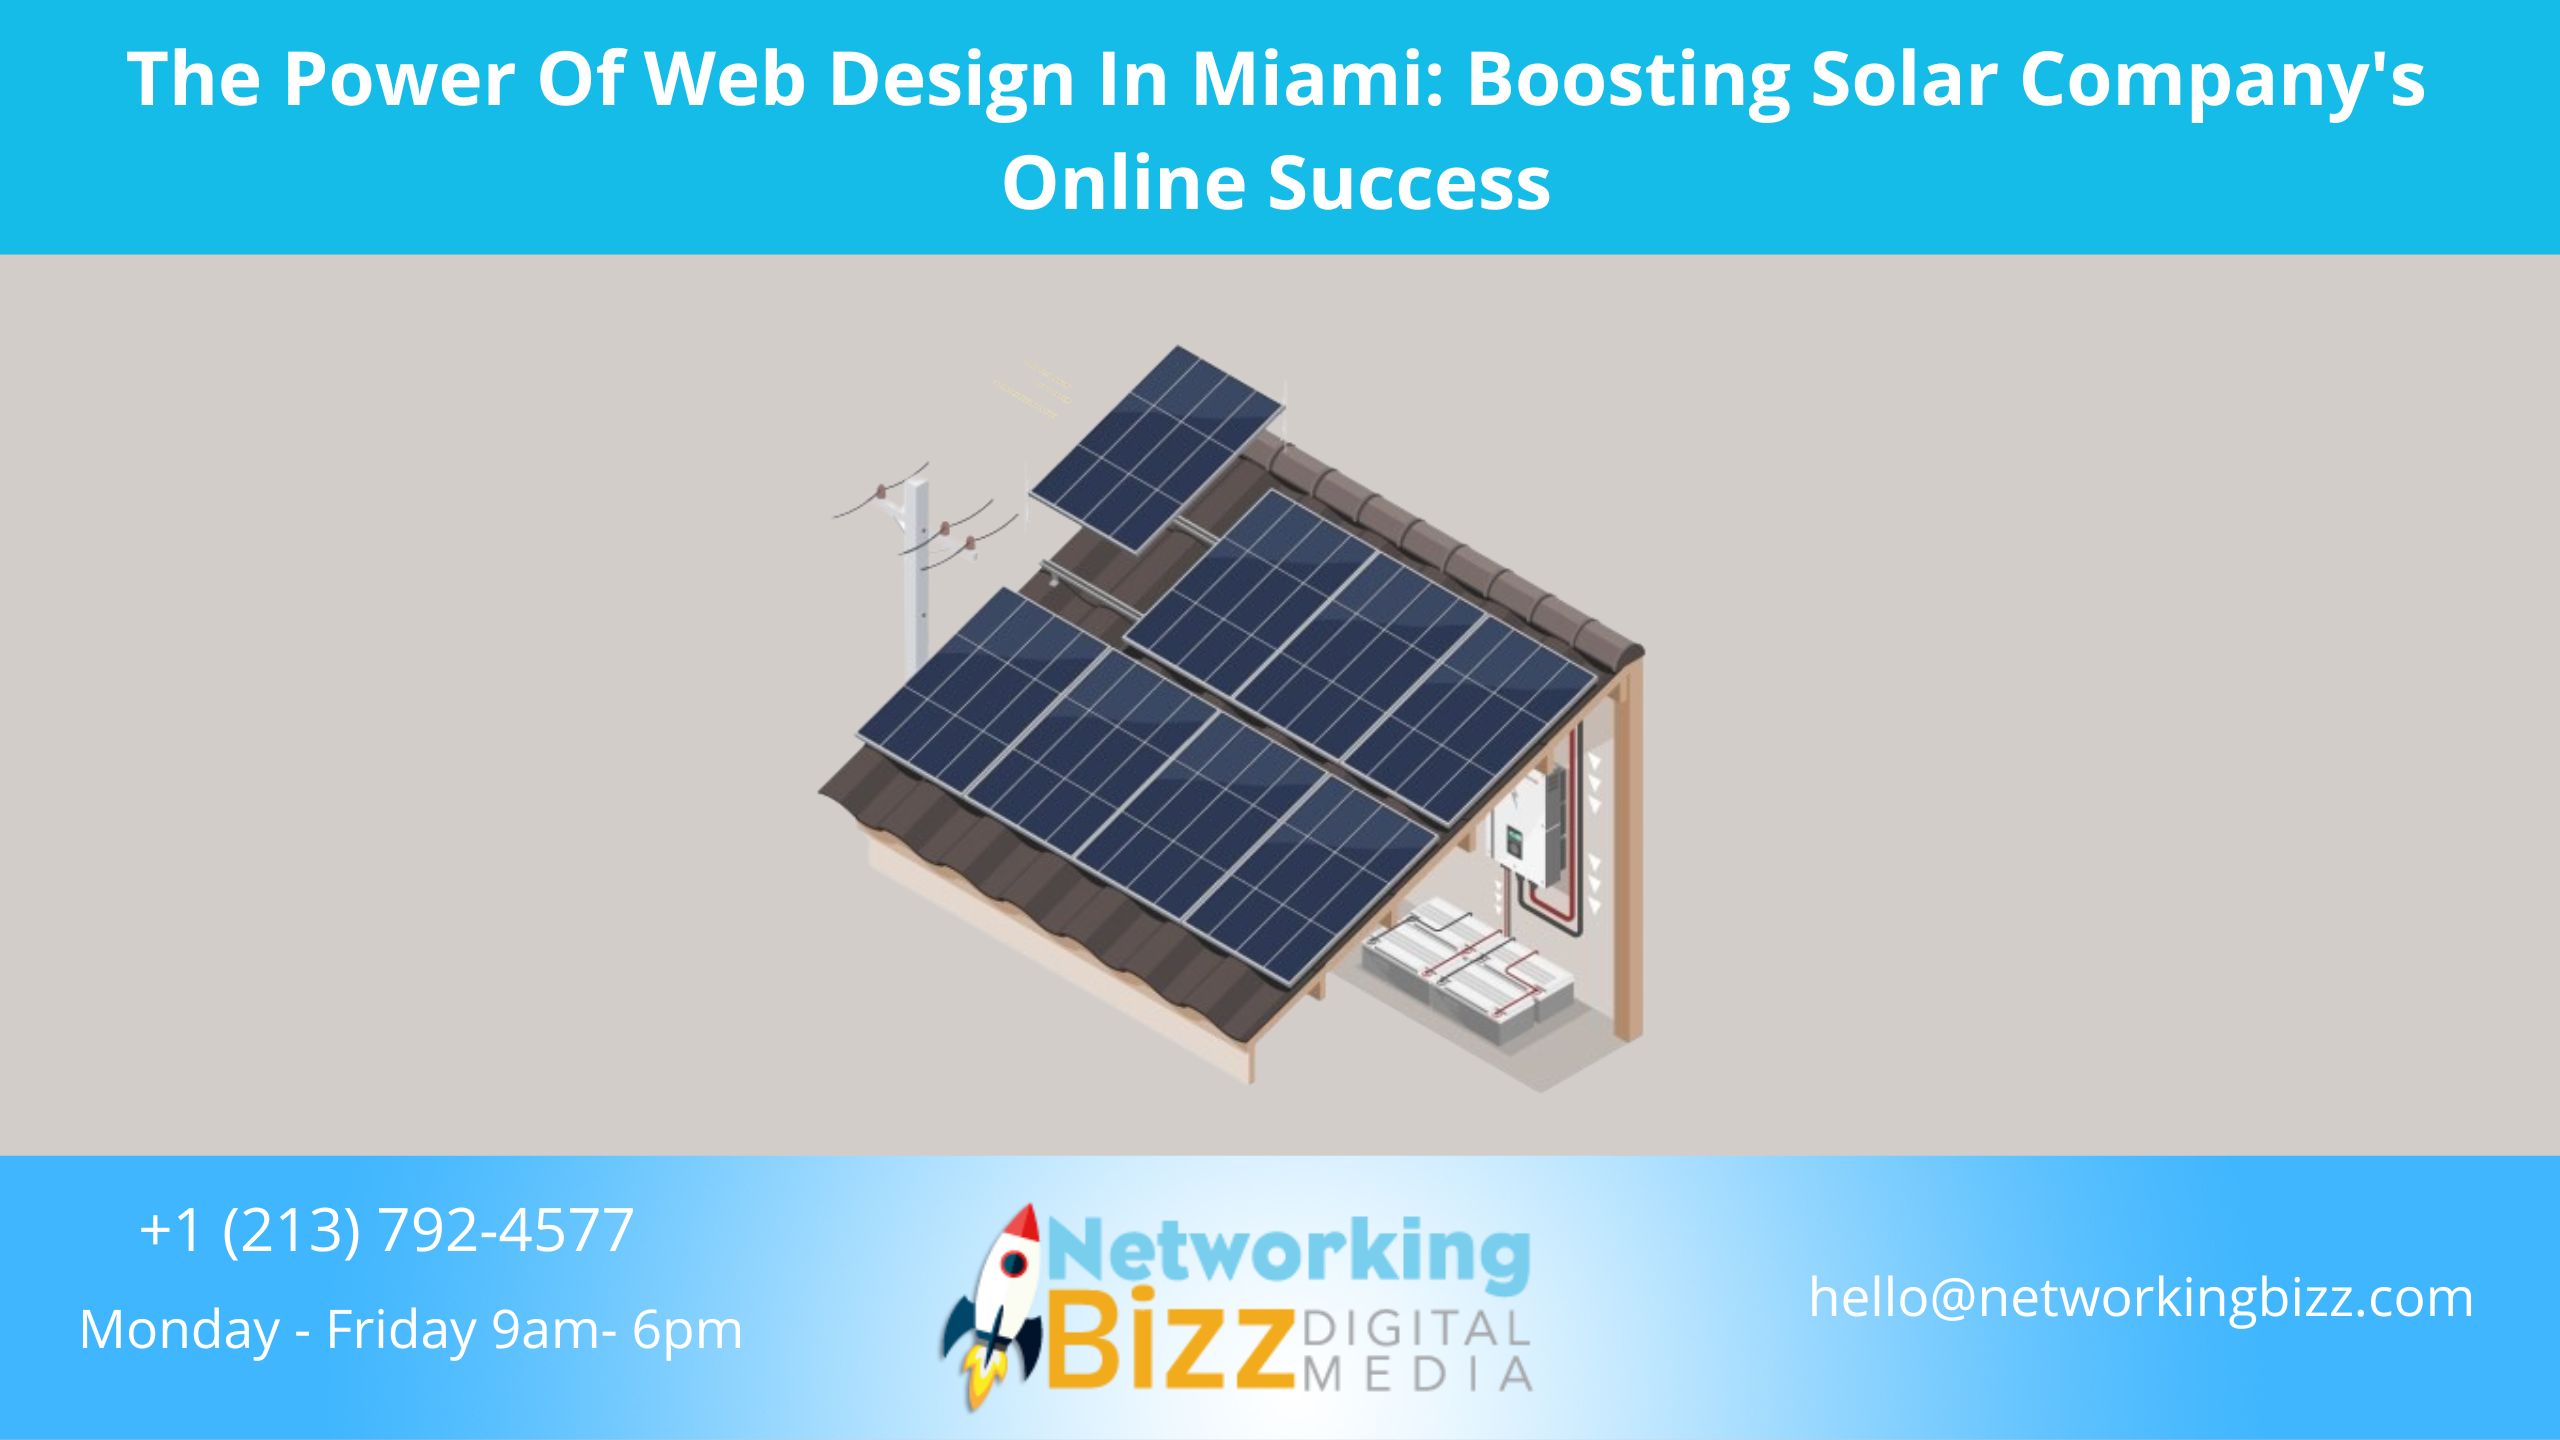 The Power Of Web Design In Miami: Boosting Solar Company’s Online Success